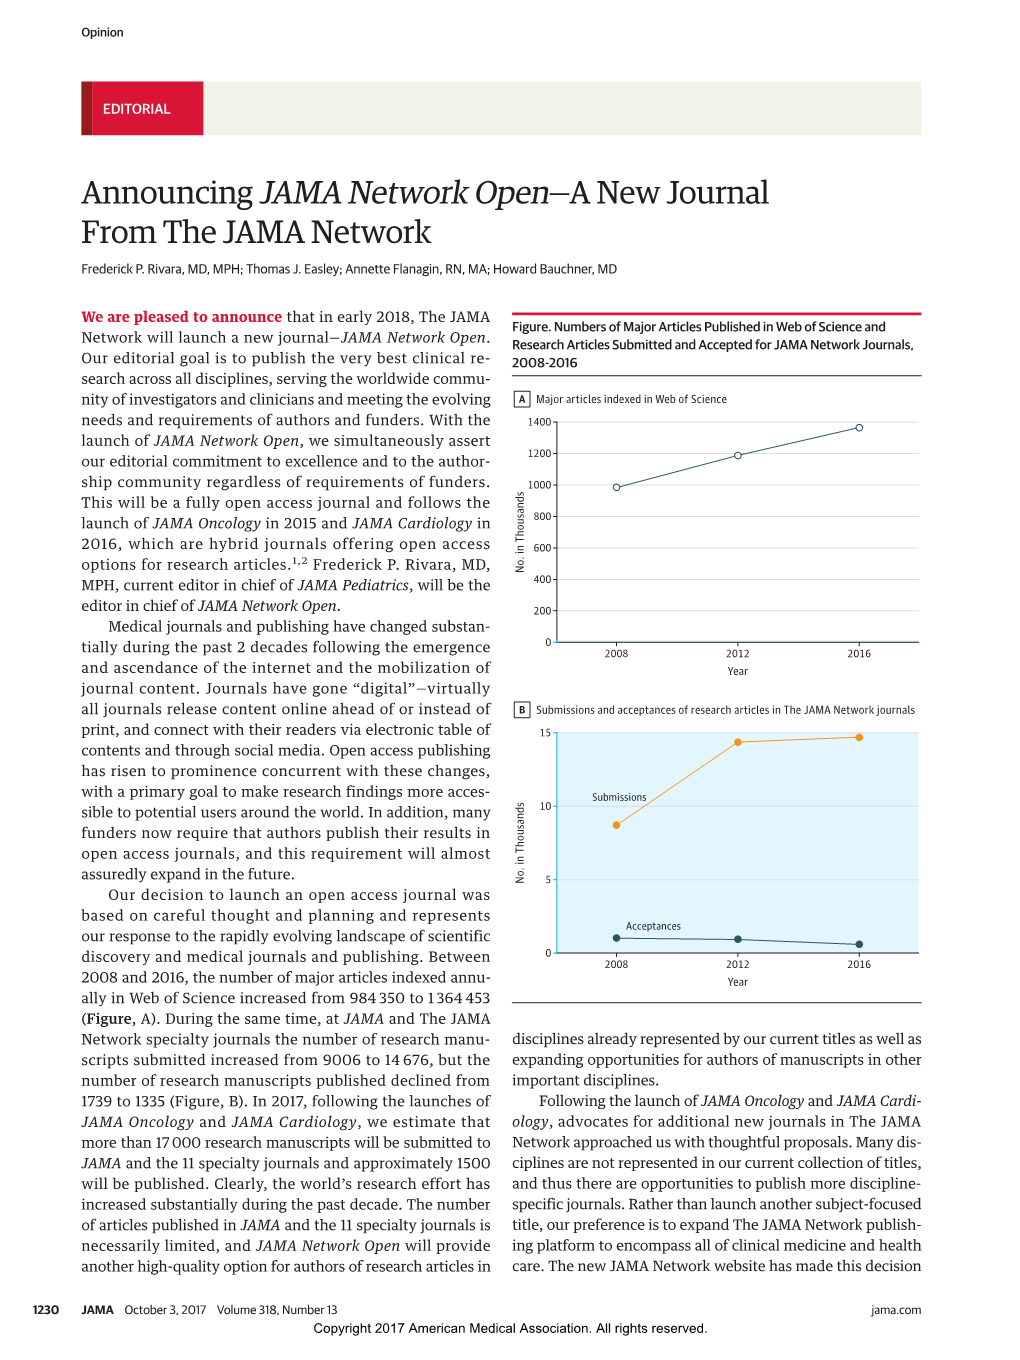 Announcing JAMA Network Open—A New Journal from the JAMA Network Frederick P